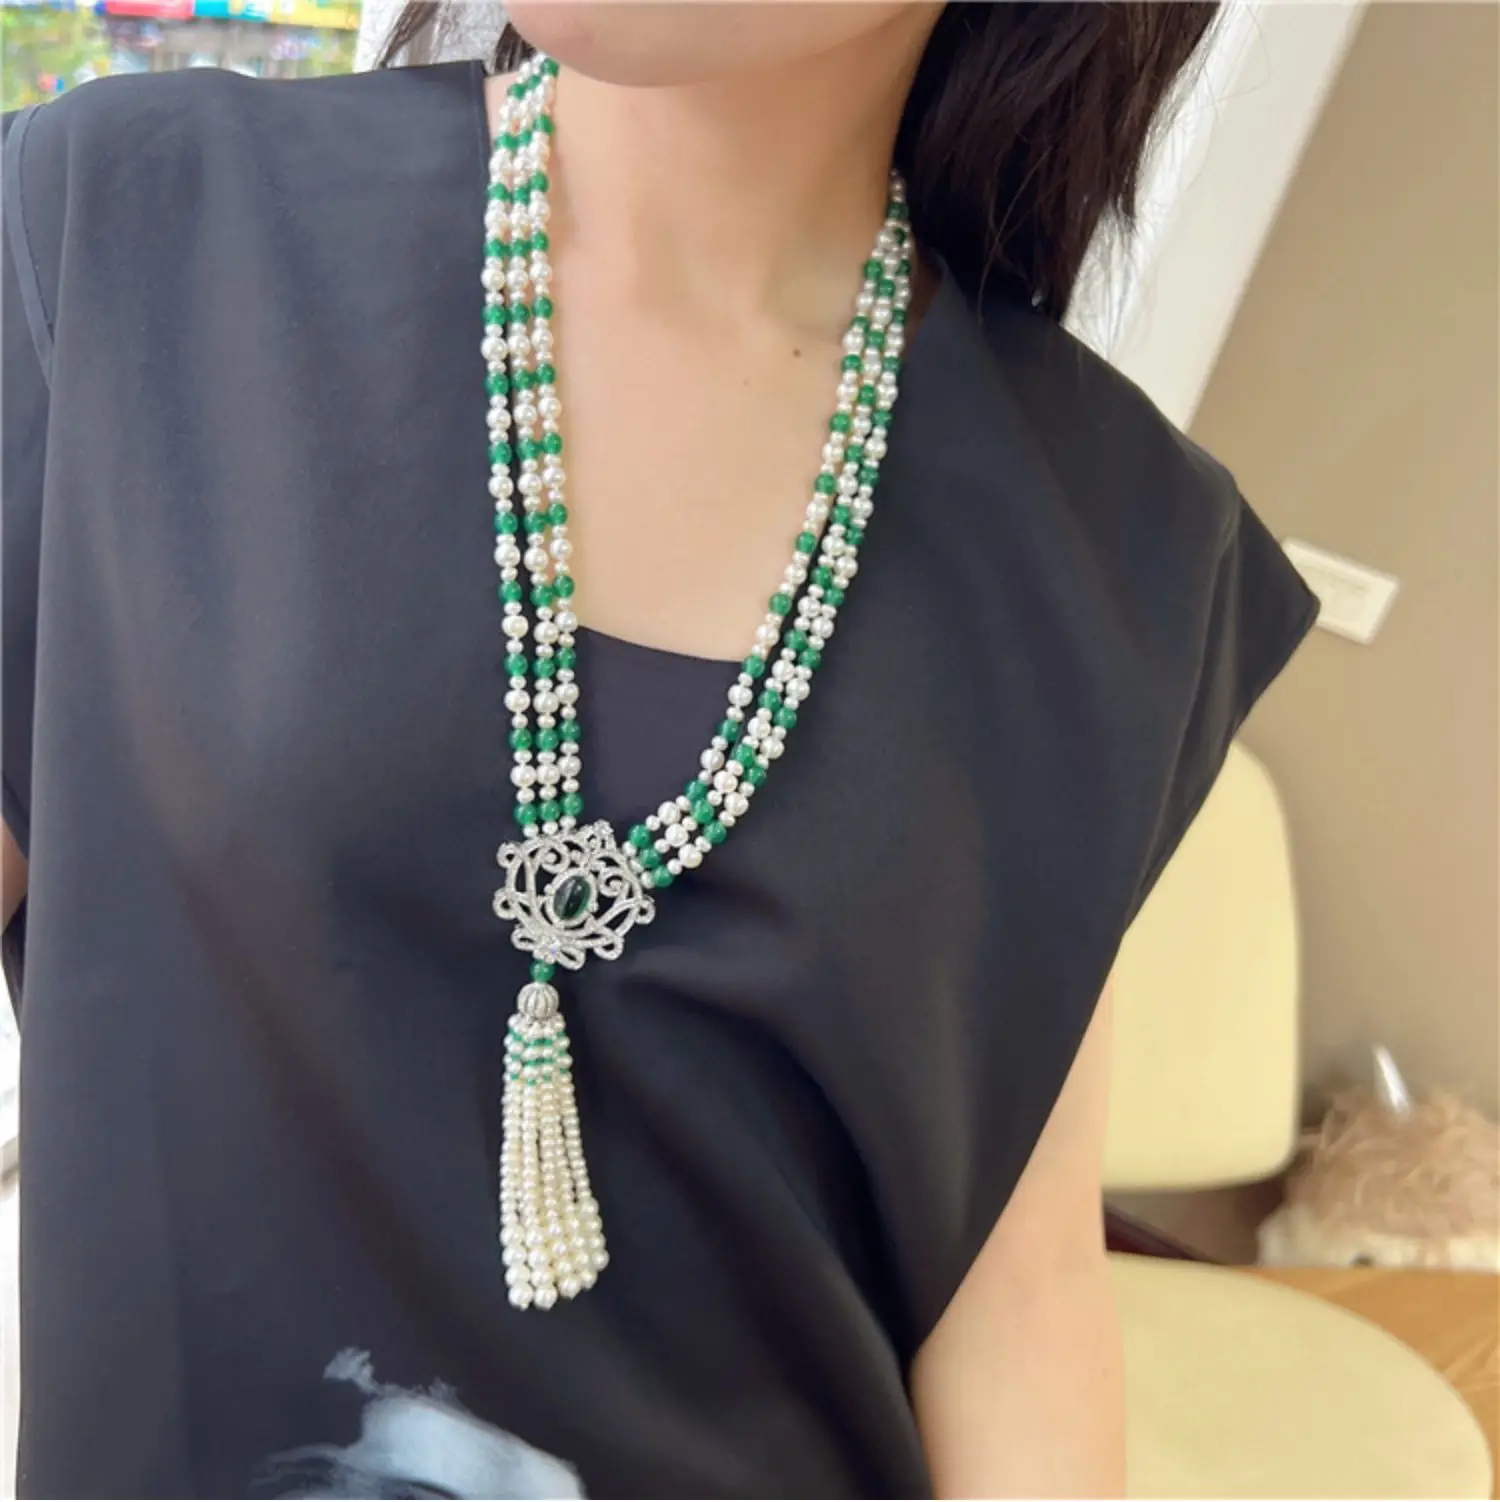 White Rice Pearl Green Round Agate Tassel CZ Pave Pendant Long Necklace Sweater Necklace For Party Women Gift